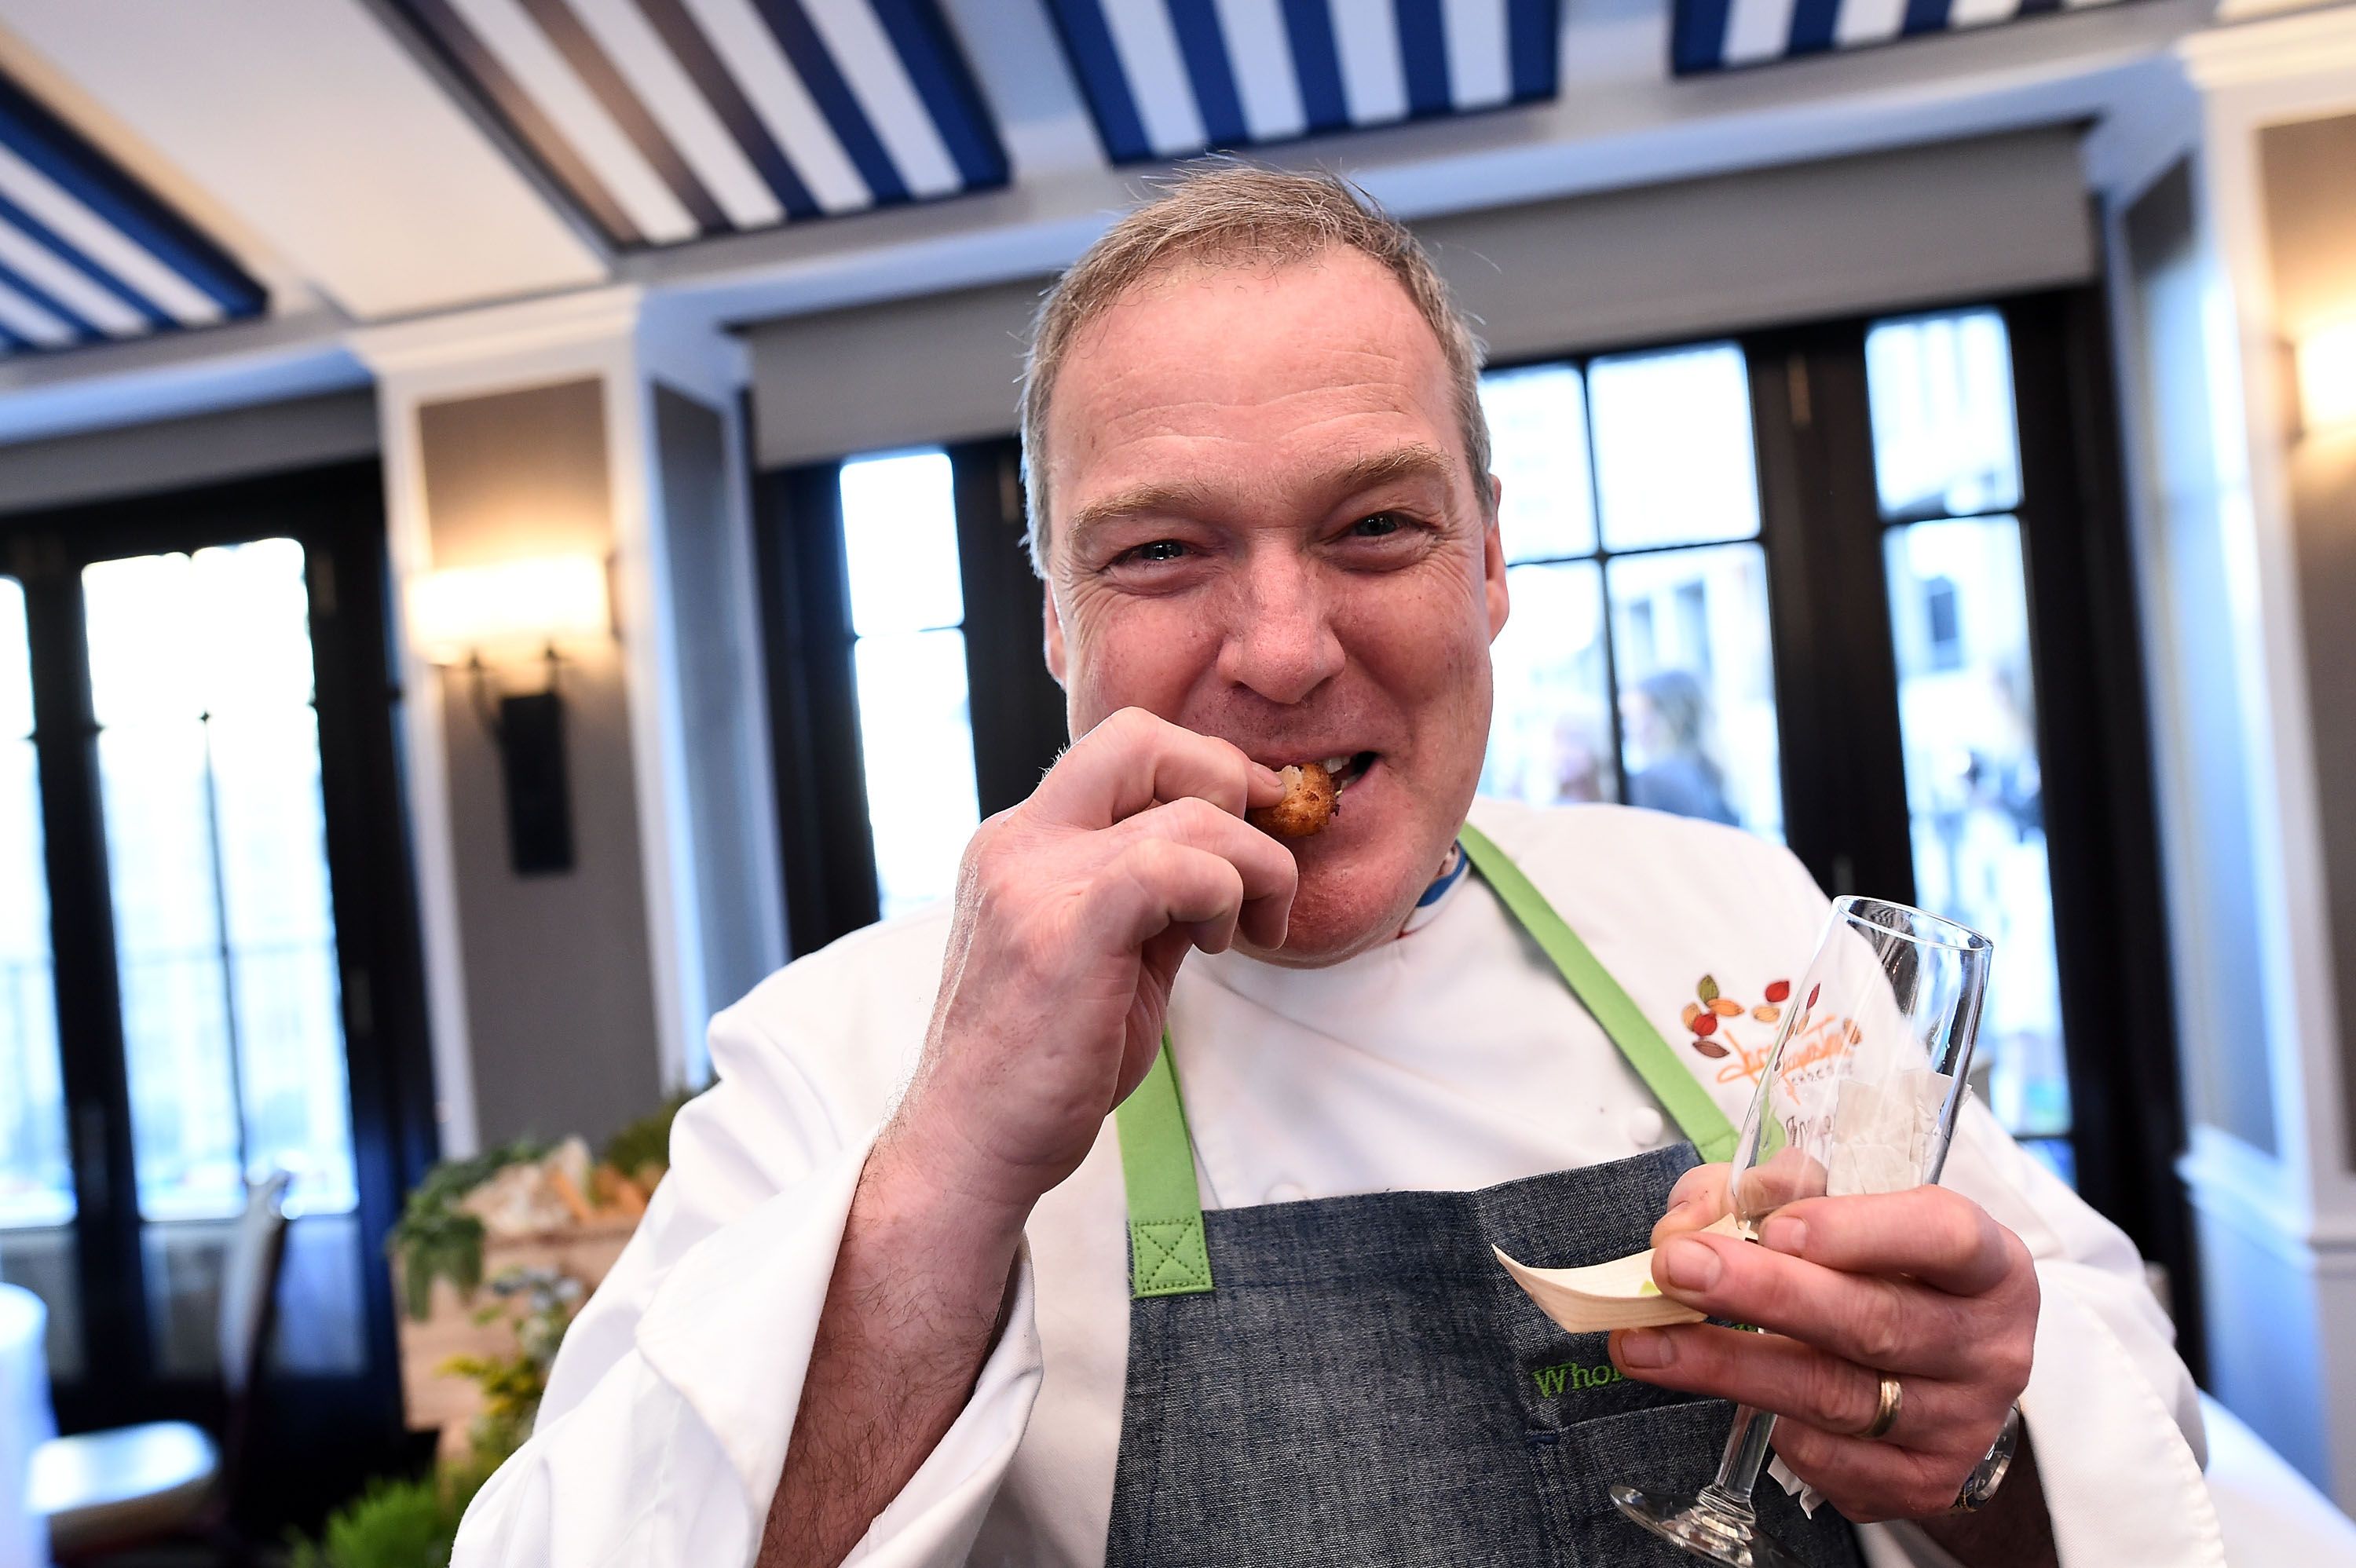 chef jacques torres attends the wholesome wave benefit news photo 522765888 1529693077